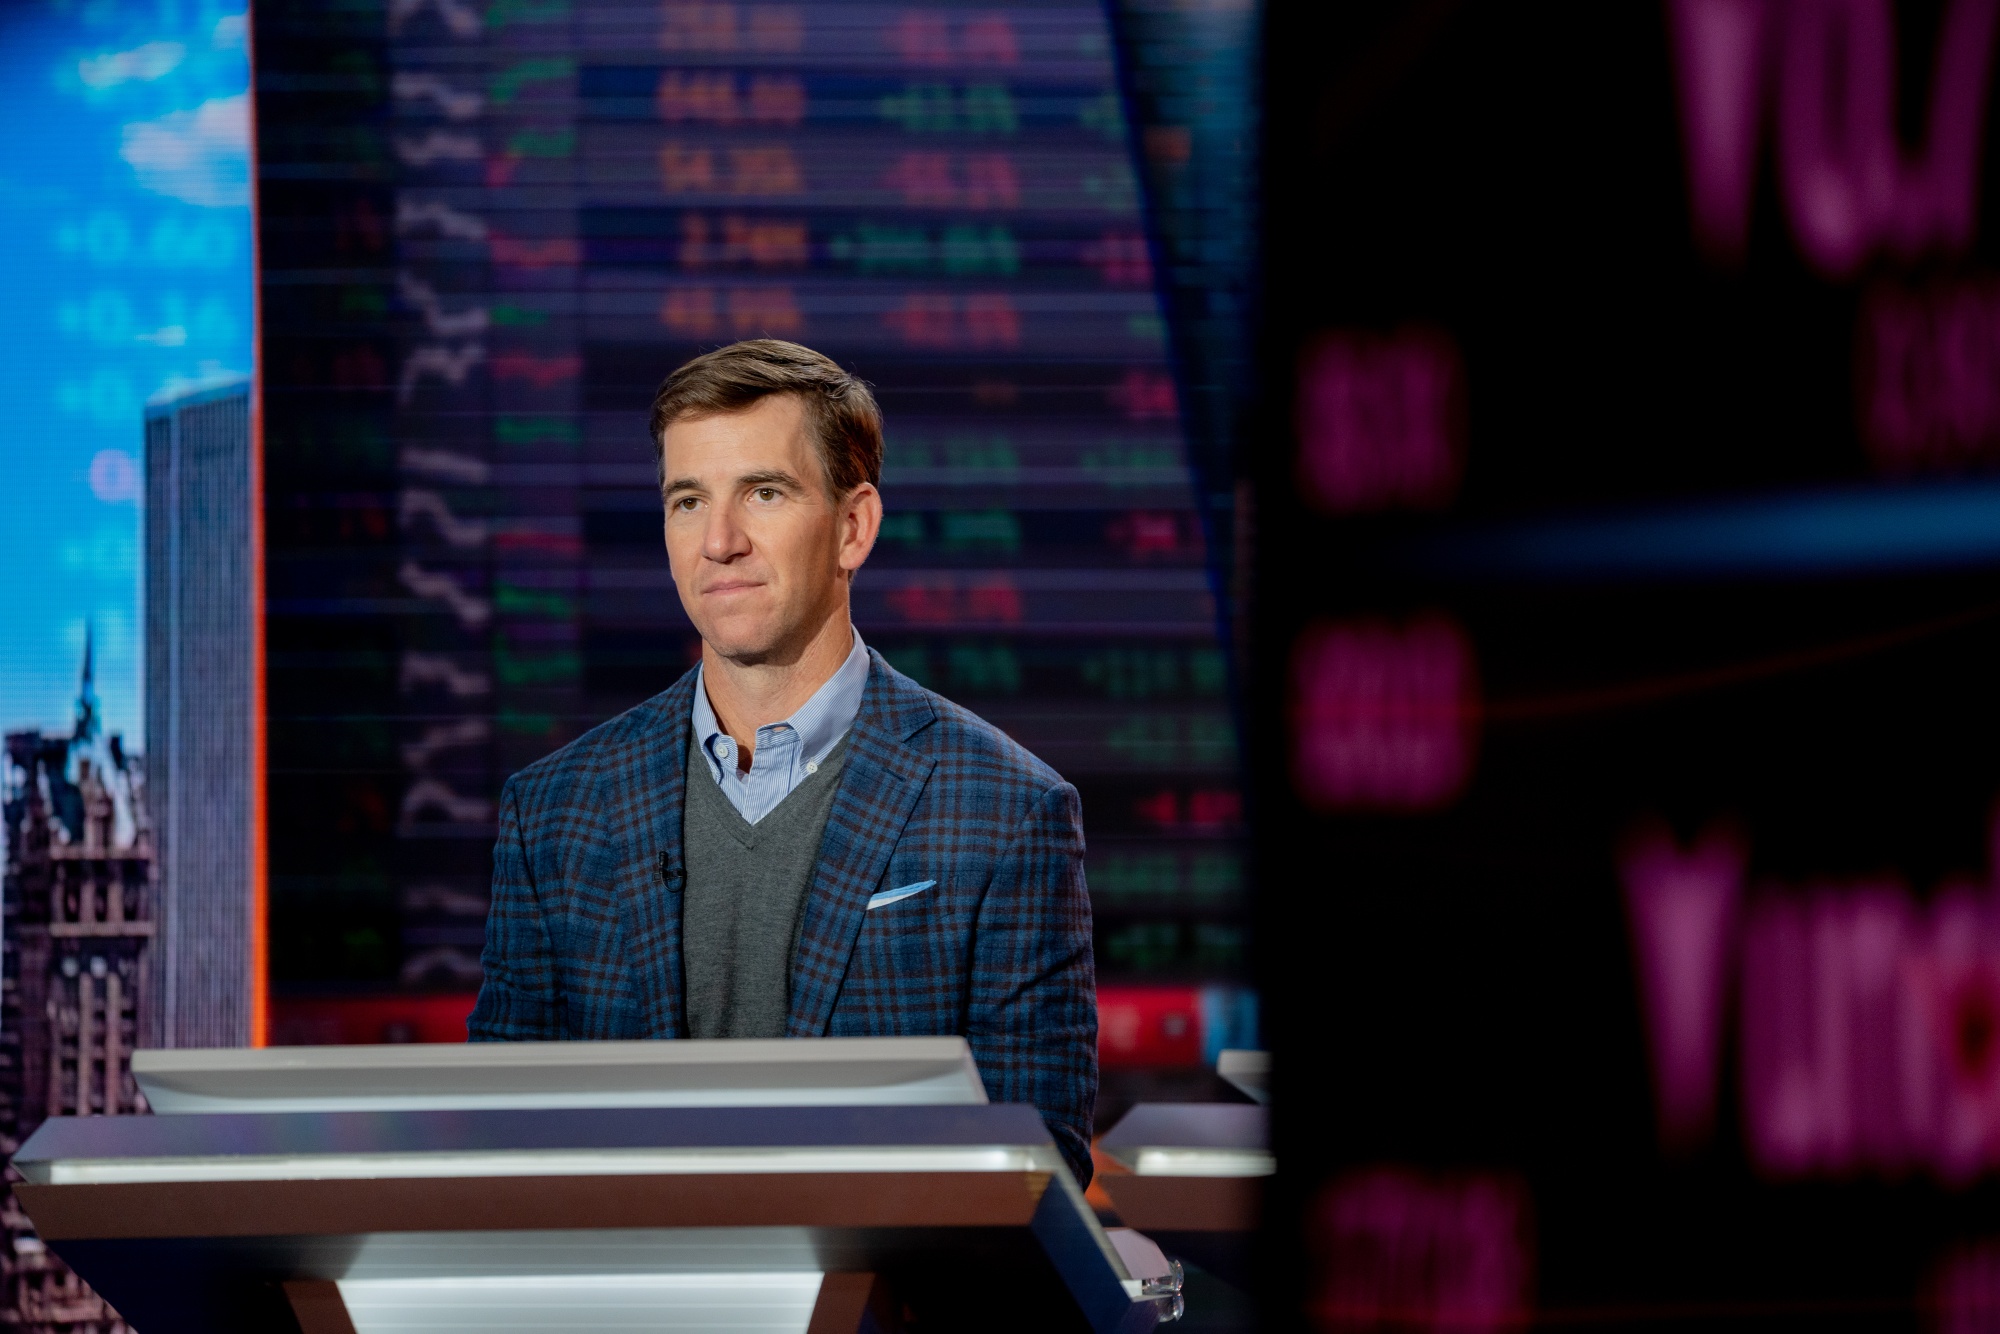 Eli Manning, Retired NY Giants NFL Quarterback, Joins Private Equity Firm -  Bloomberg